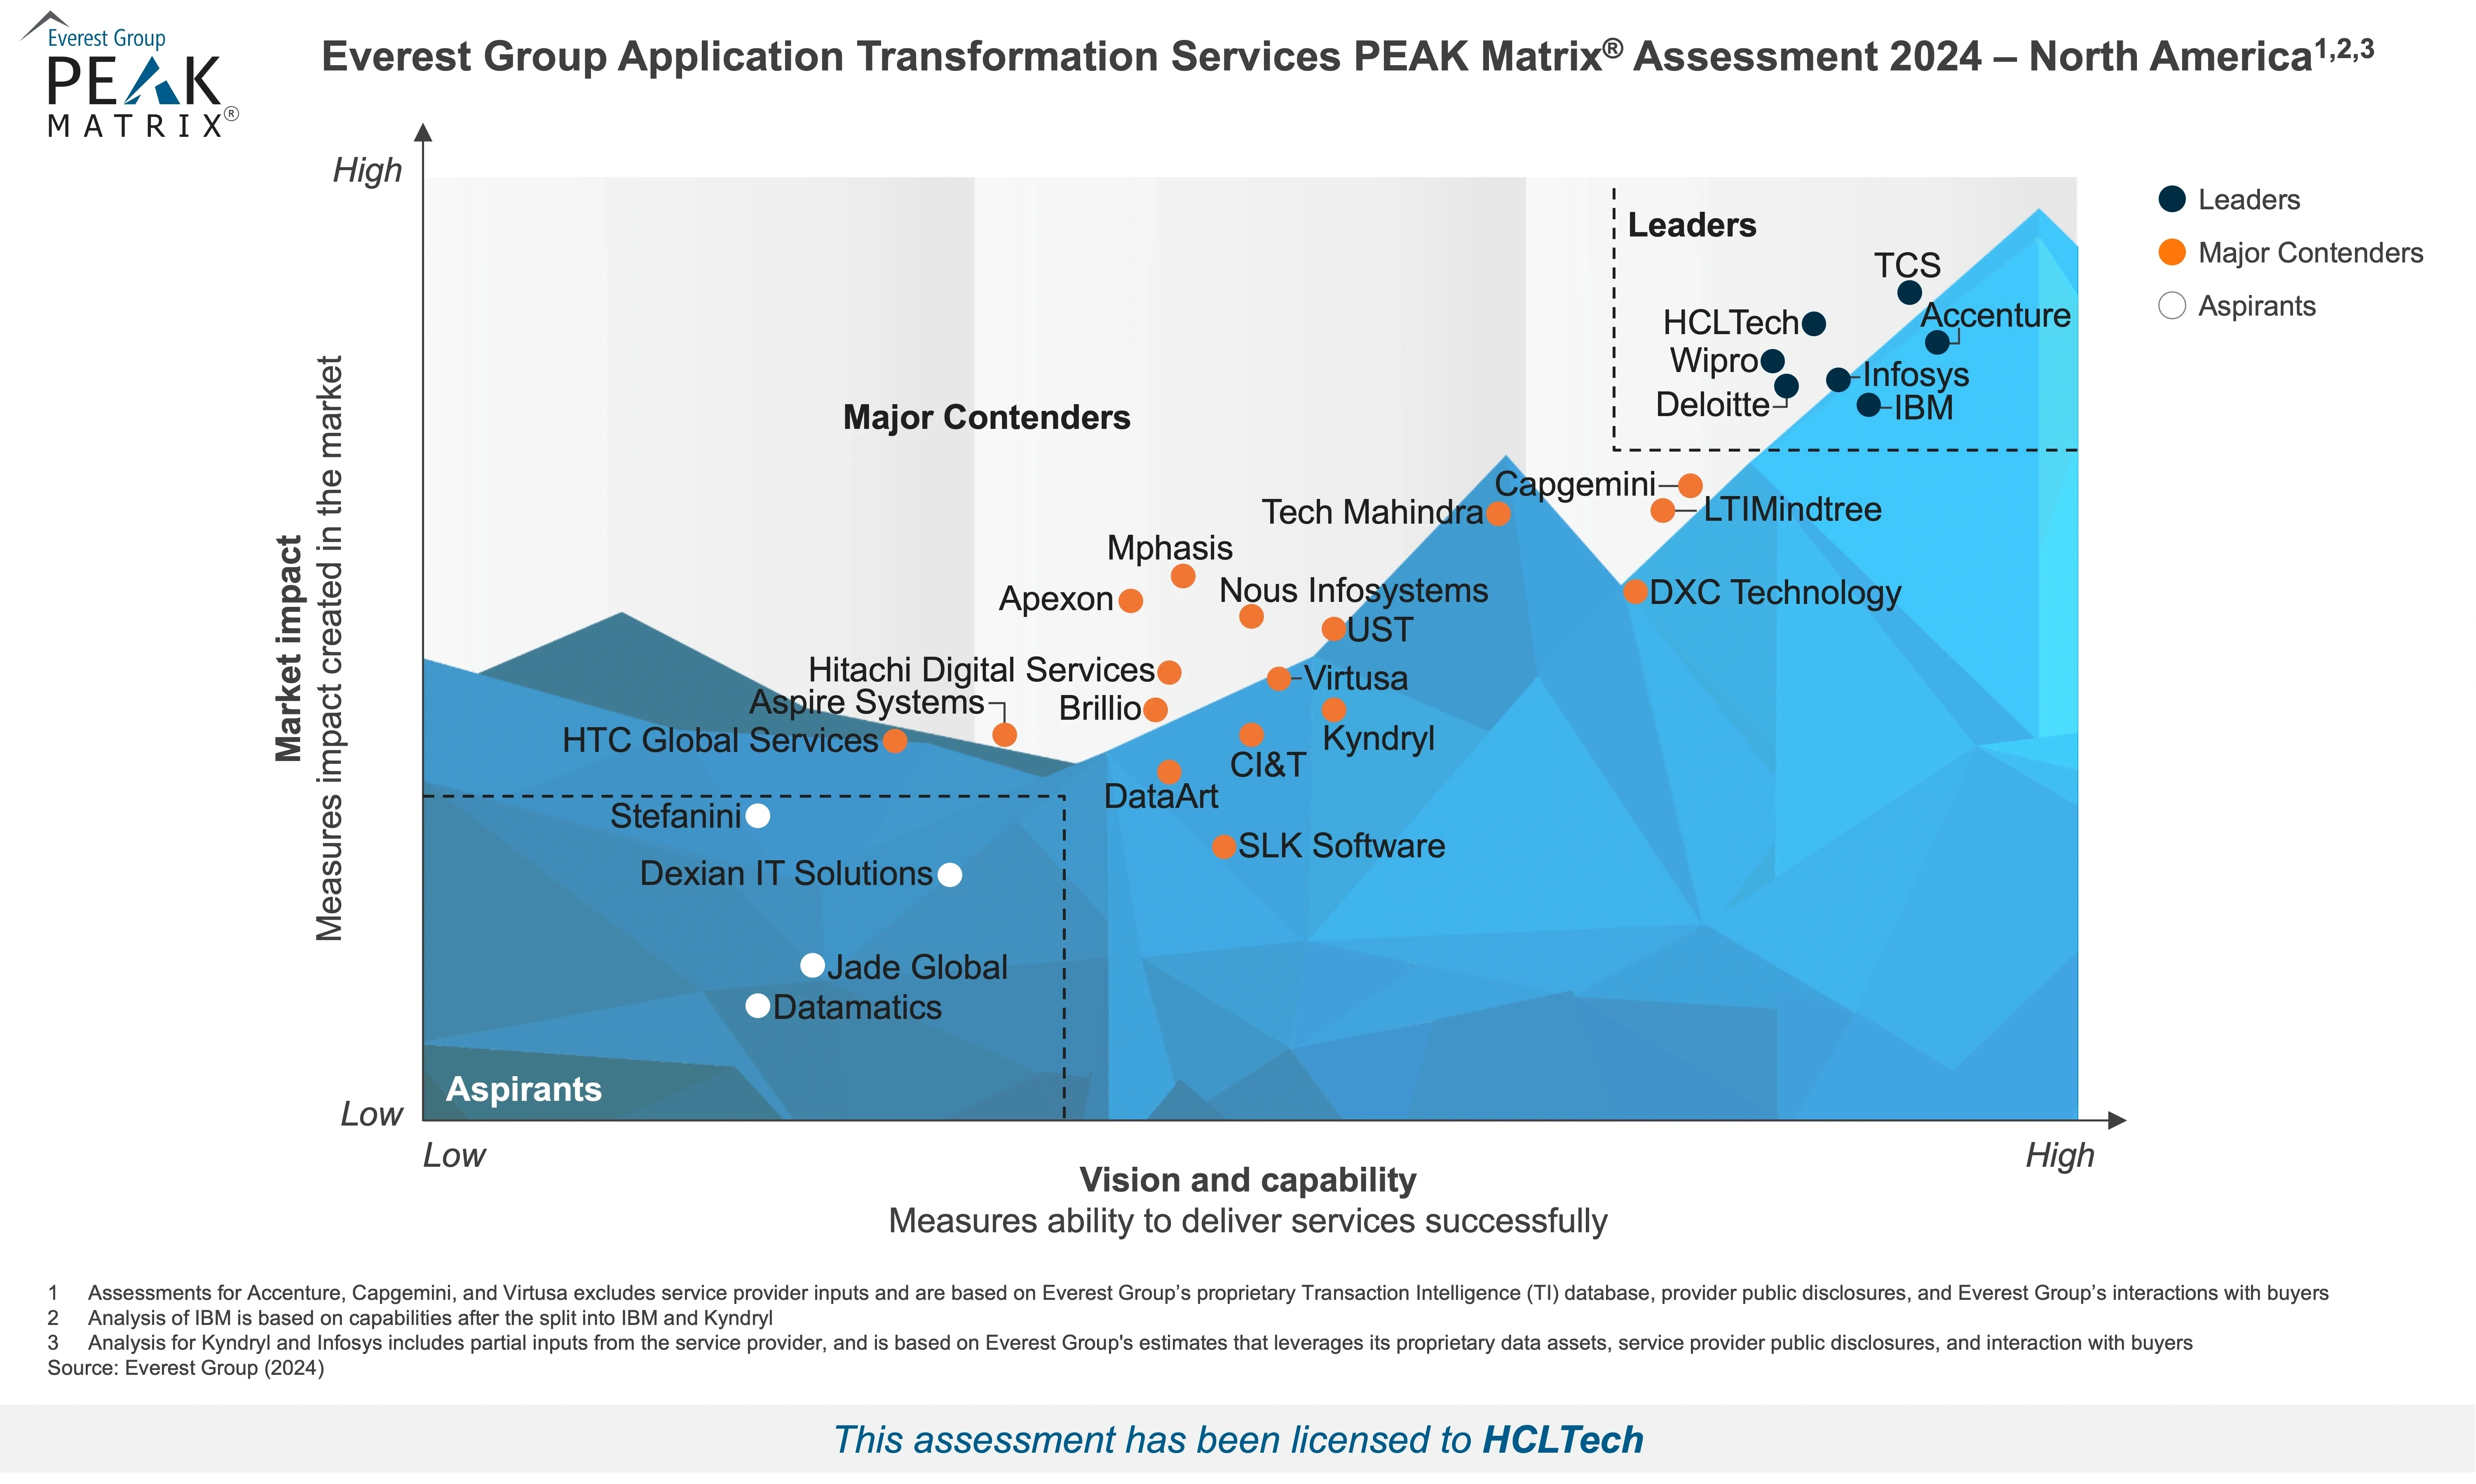 HCLTech positioned as a Leader in the Application Transformation Services PEAK Matrix® Assessment 2024 – North America